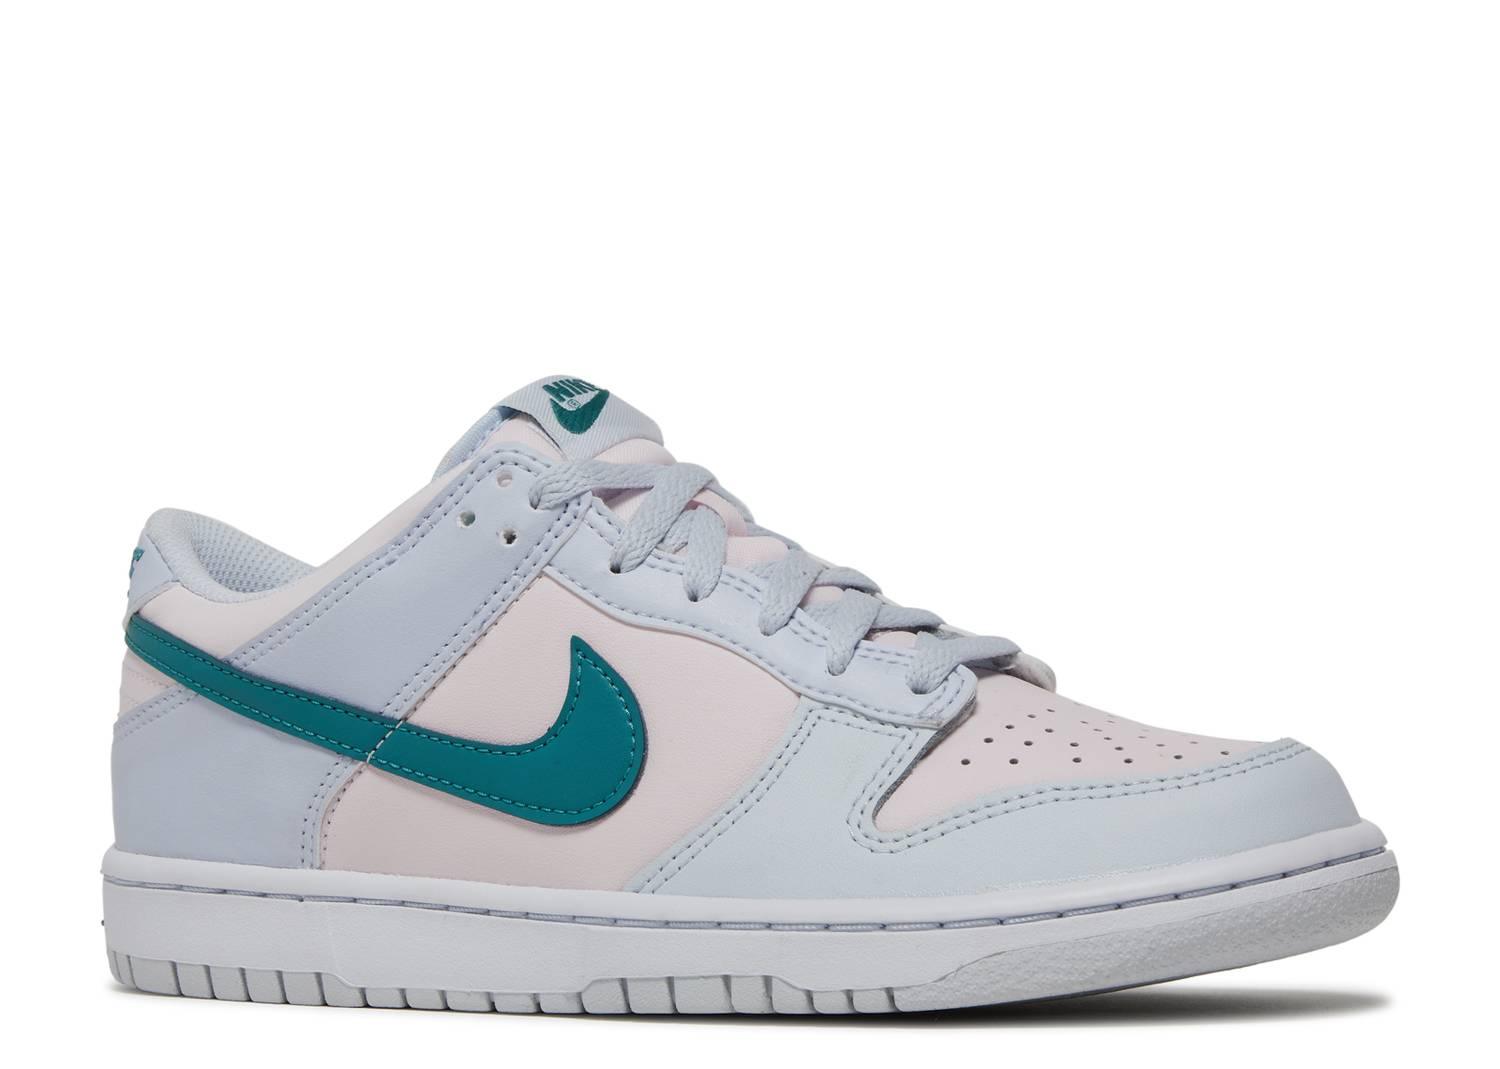 NIKE DUNK LOW GS 'MINERAL TEAL' - Kicksinto